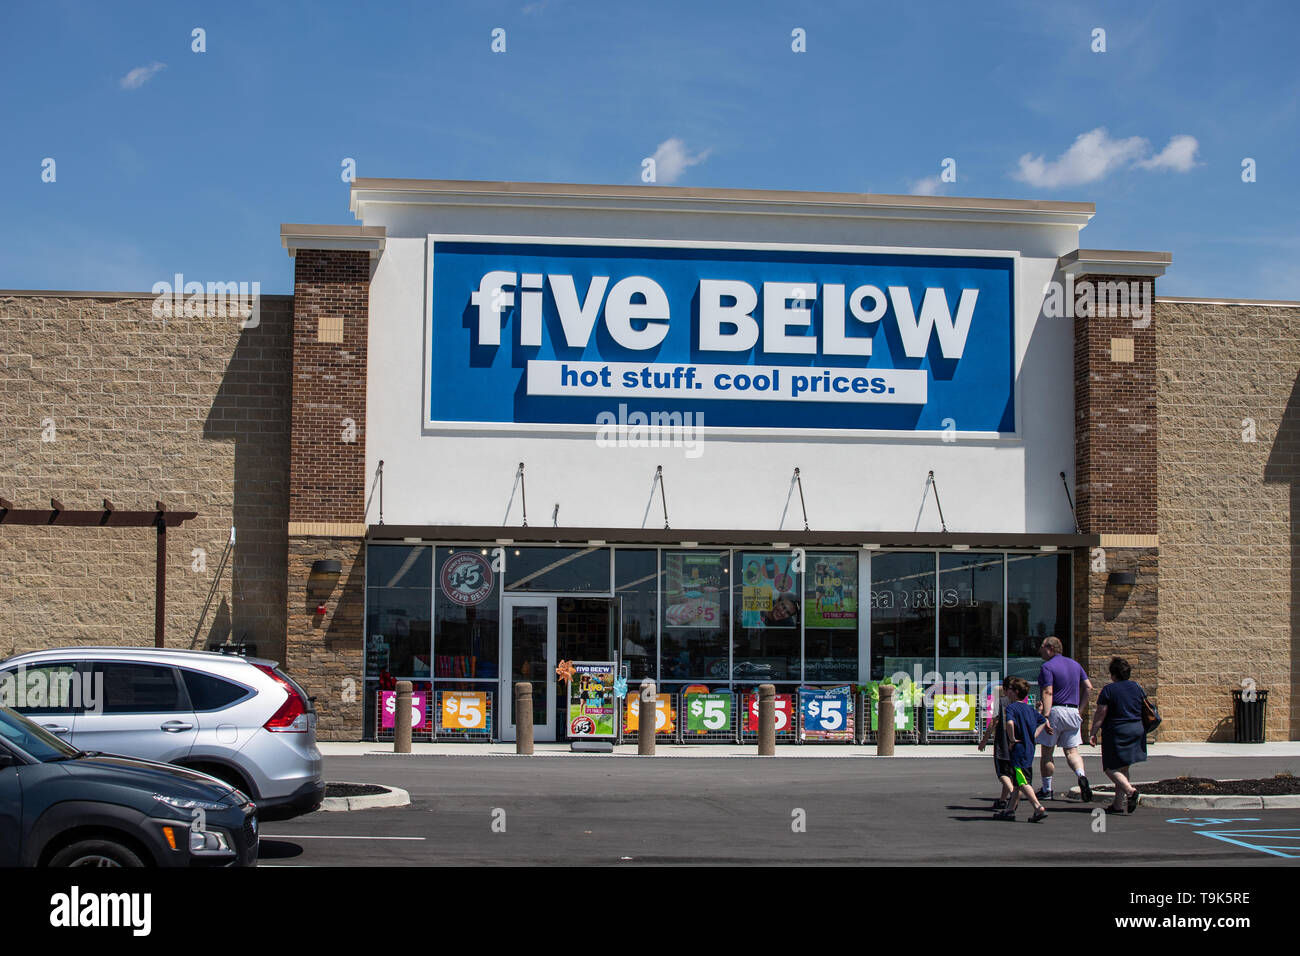 Whitestown - Circa May 2019: Five Below Retail Store. Five Below is a chain that sells products that cost up to $5 III Stock Photo